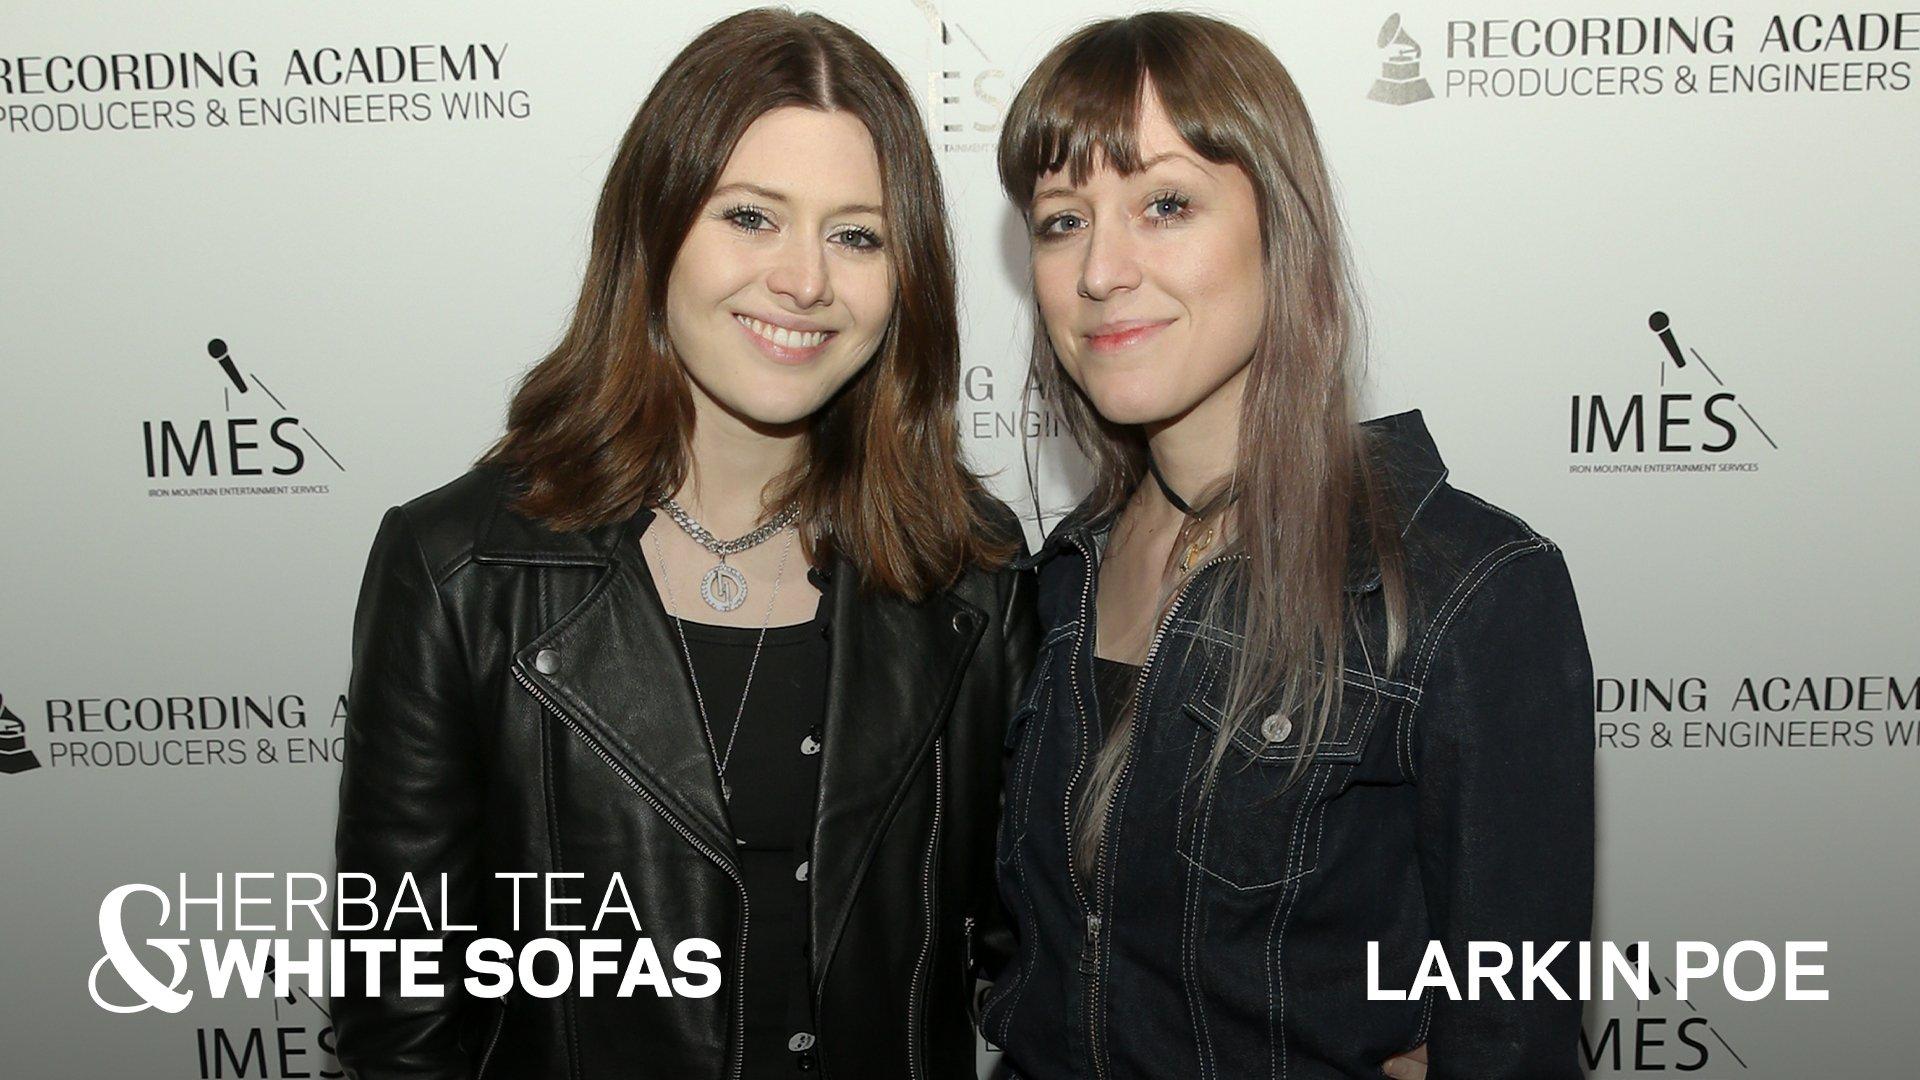 Larkin Poe On Their Love For Local Snacks On Tour